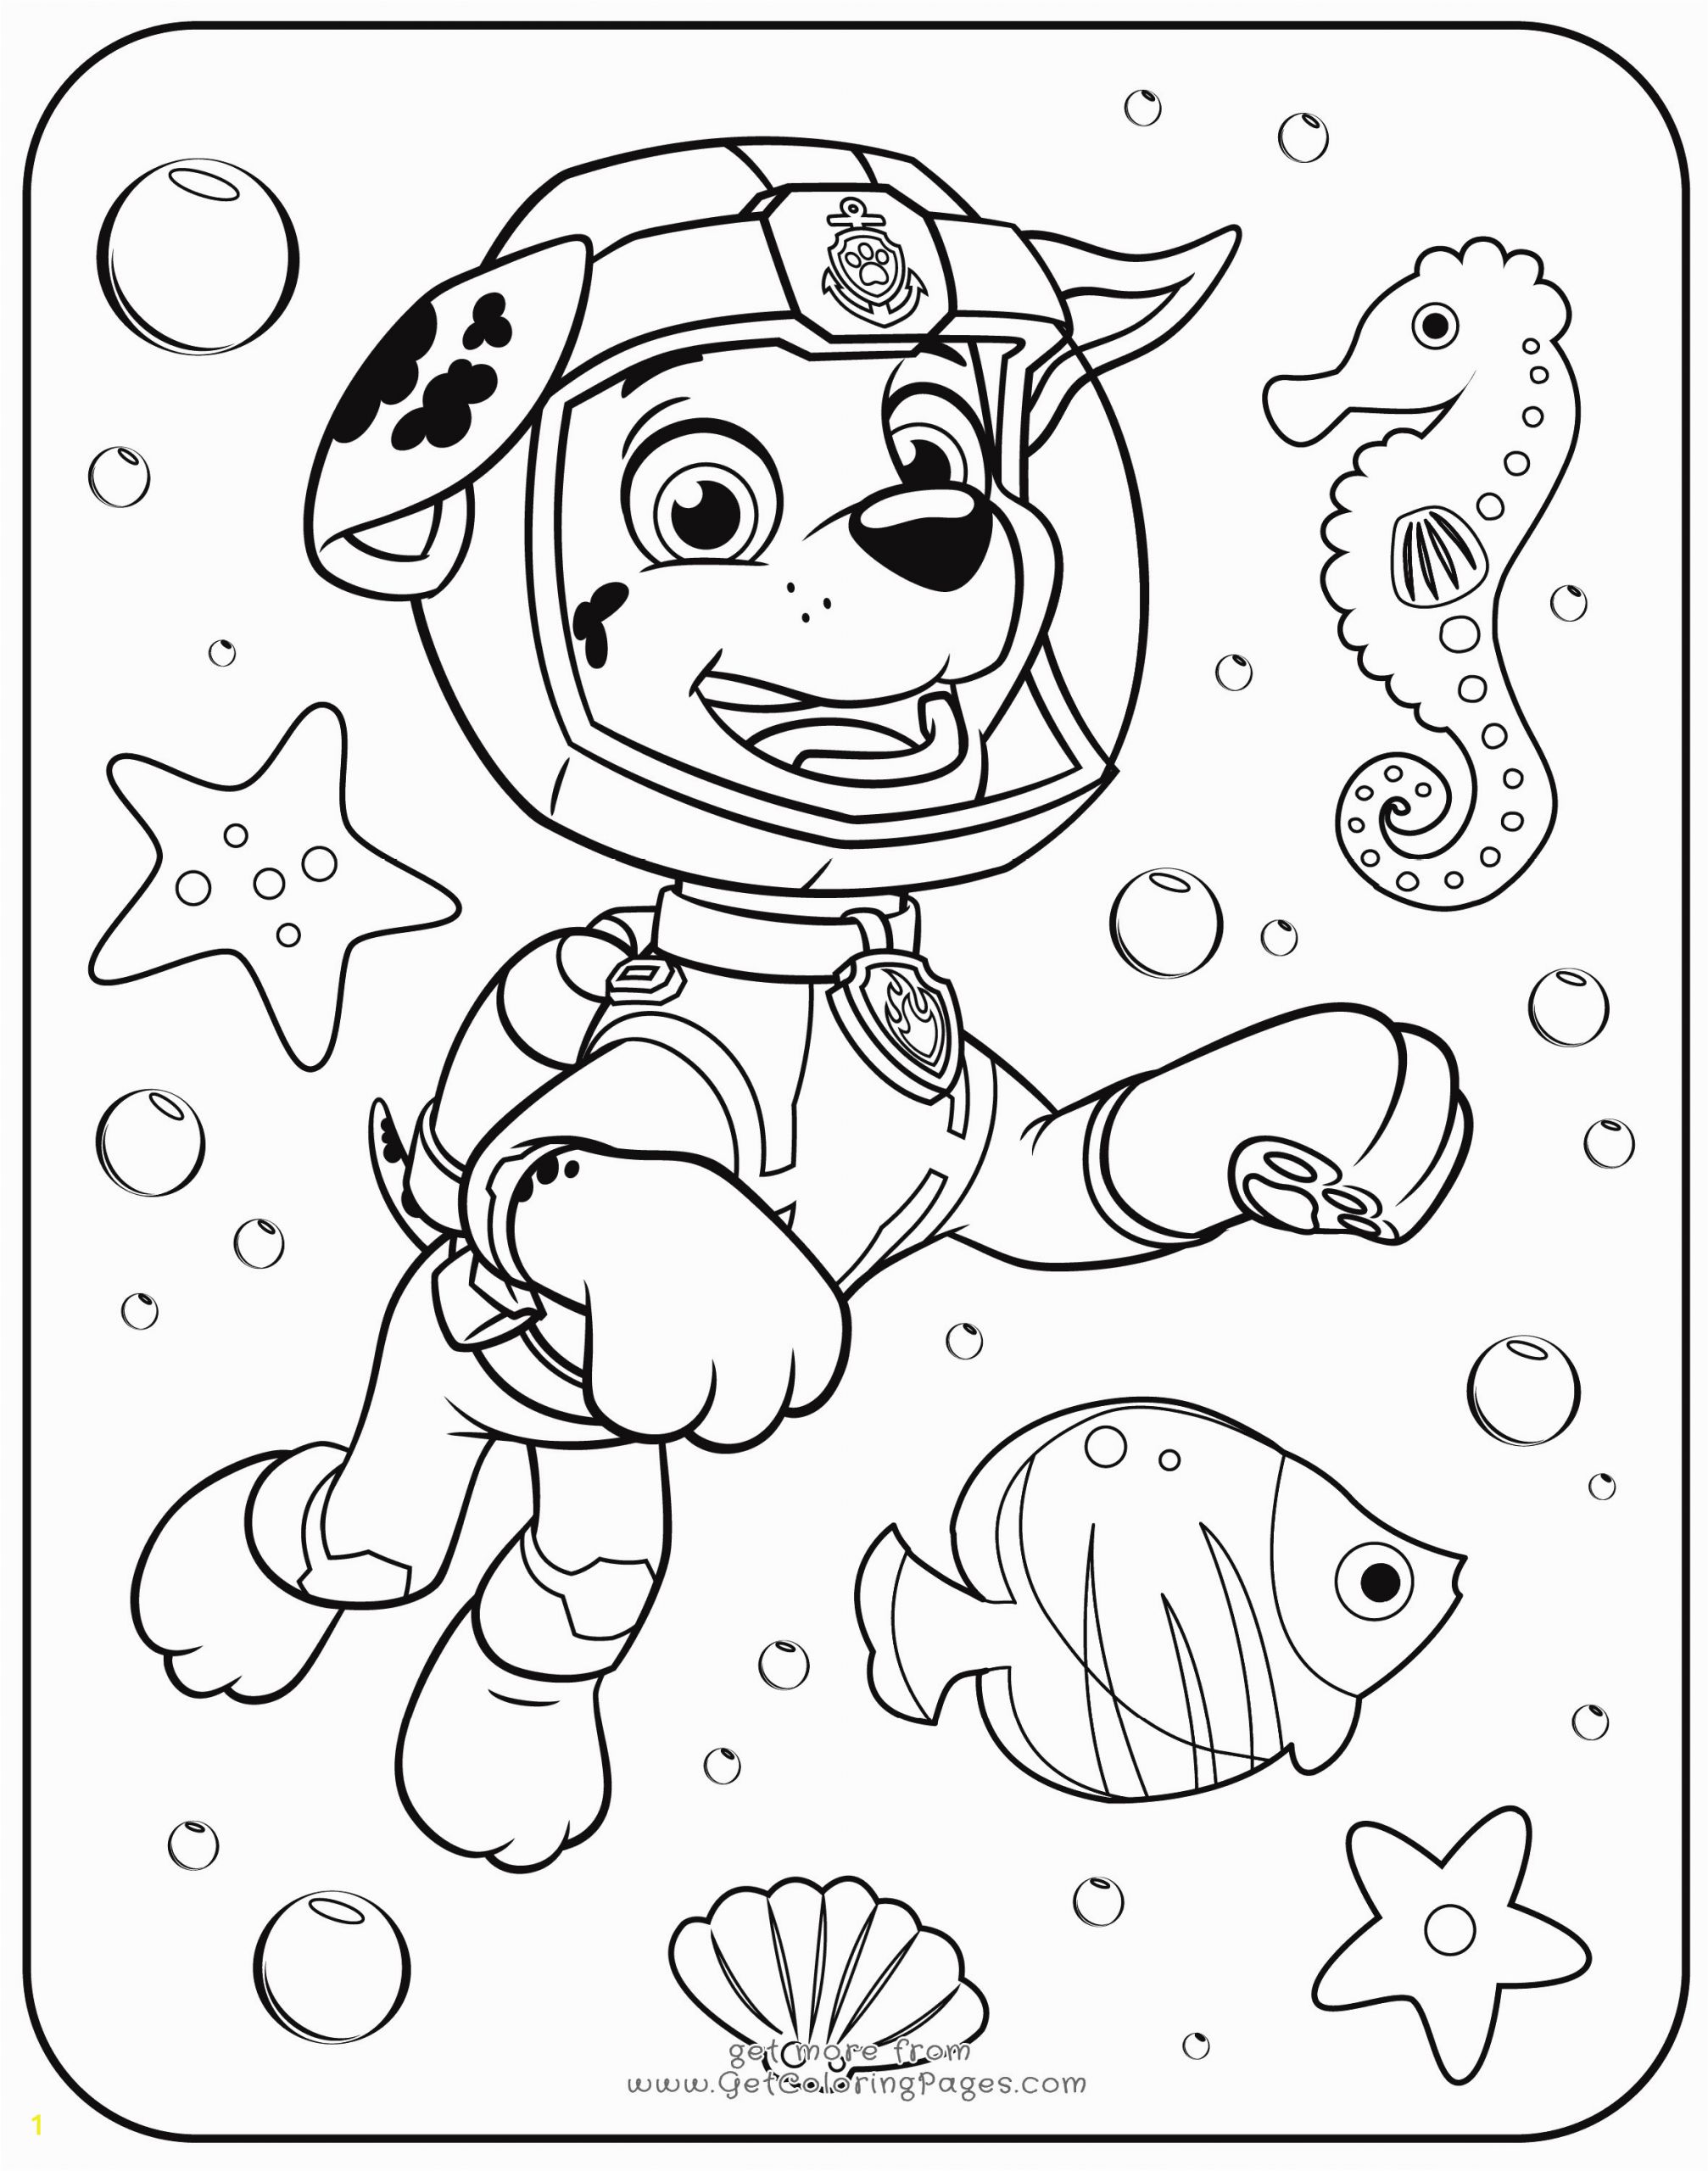 pawtrol coloringges for kids at drawings free skye book marvelous paw patrol coloring pages sky from marshall rubble chase rocky zuma and everest girl x helicopter